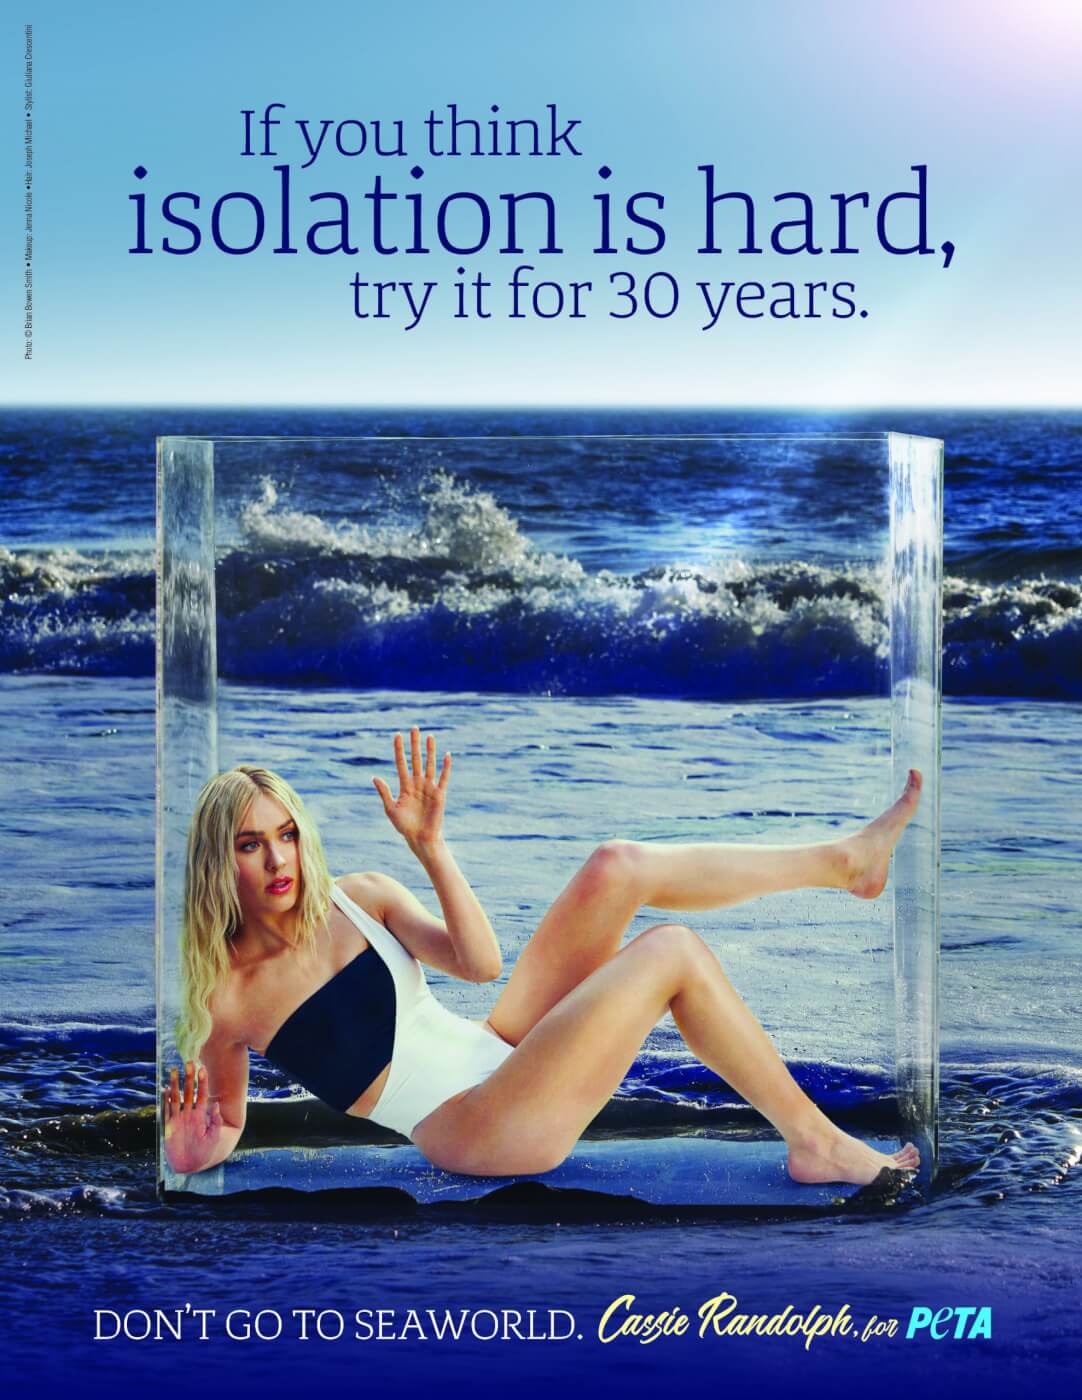 cassie randolph in ad for peta to save the whales and dolphins at Seaworld